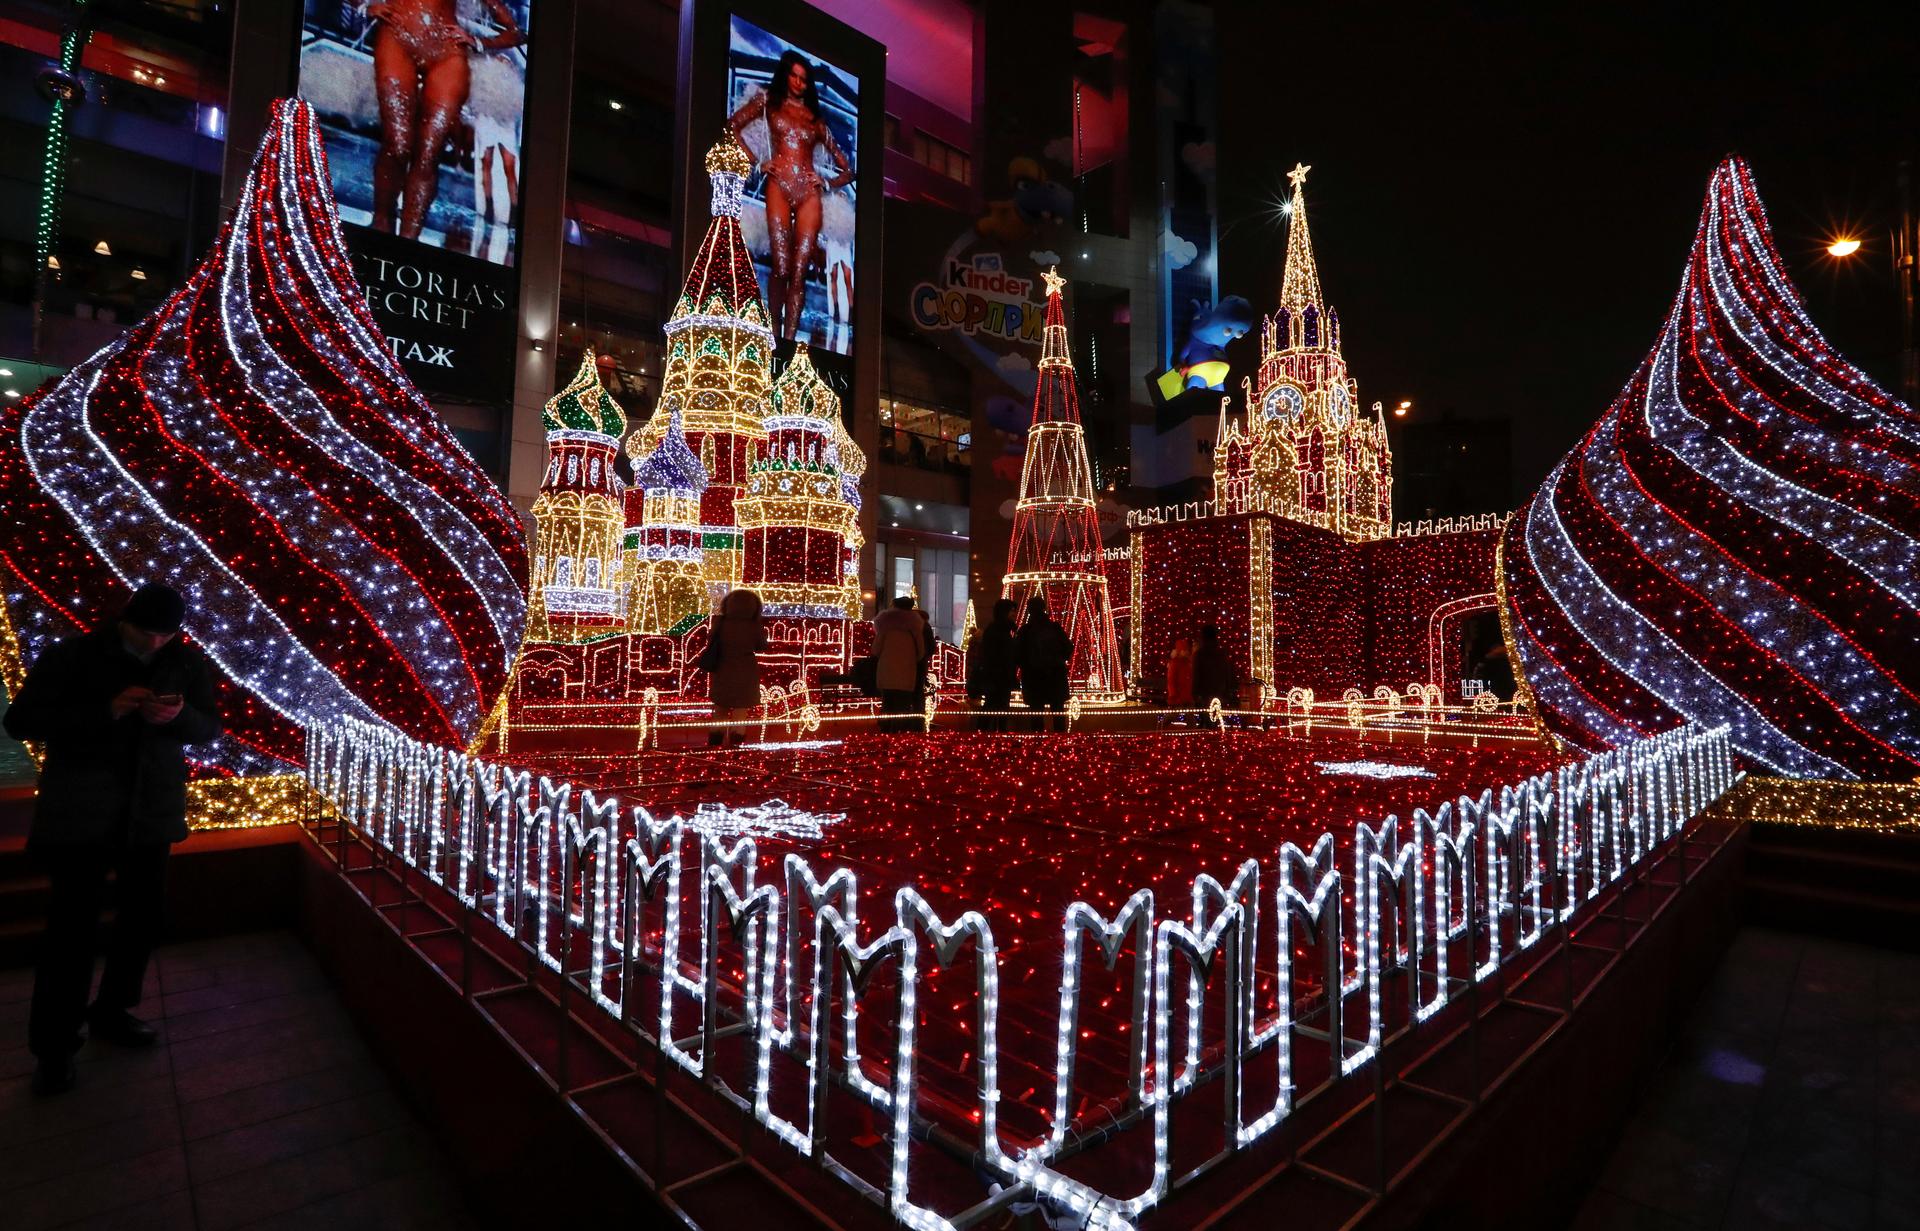 People watch festive decorations depicting the Moscow Kremlin for the New Year and Christmas season at Kievsky Railway Station in Moscow, Russia December 28, 2017.